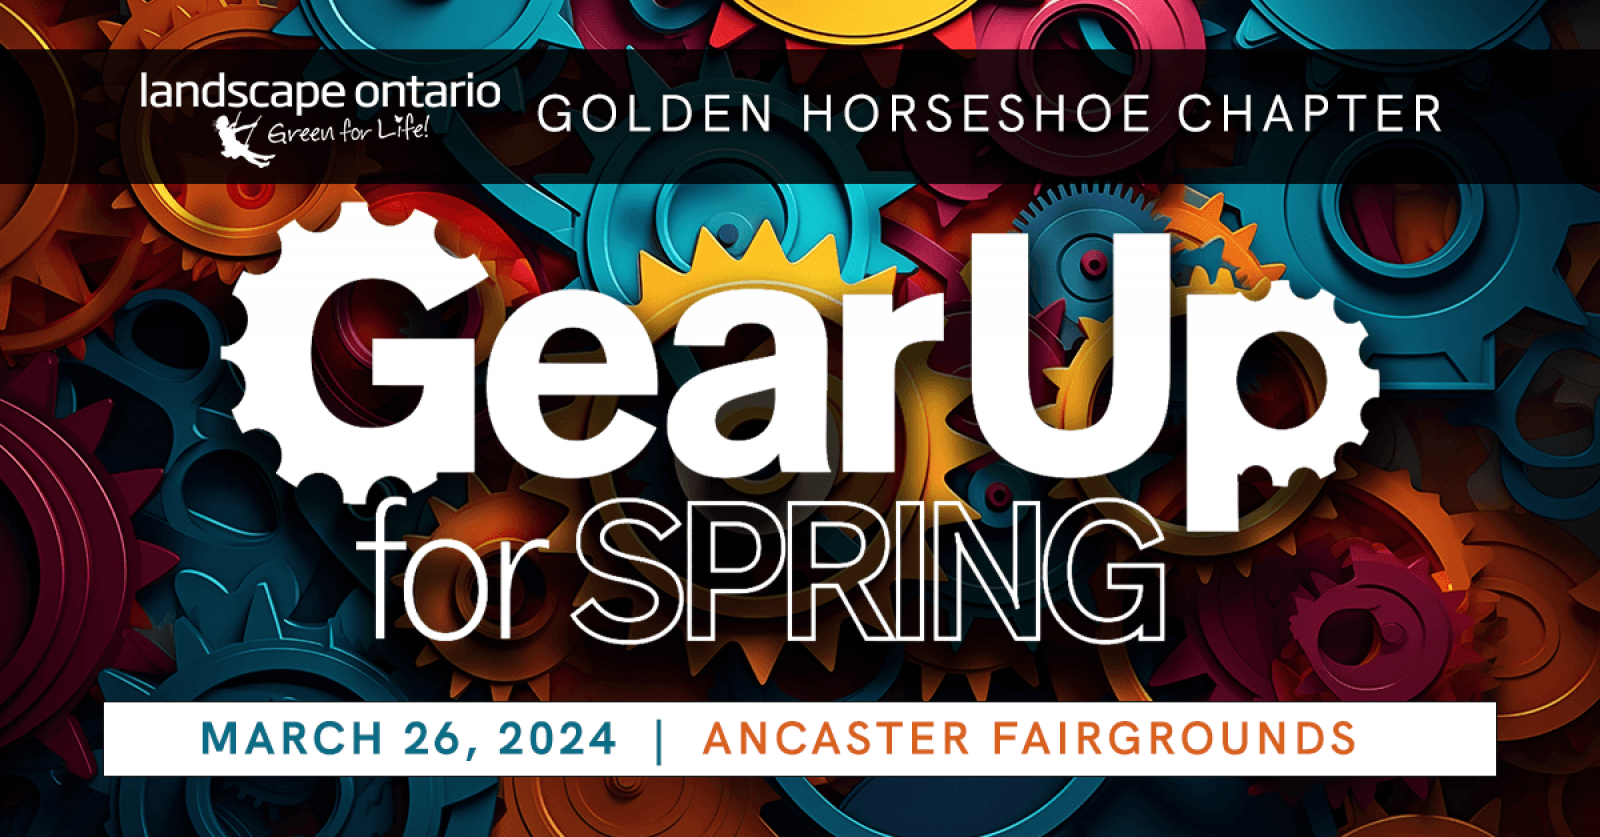 Golden Horsehoe Chapter: Gear Up For Spring 2024